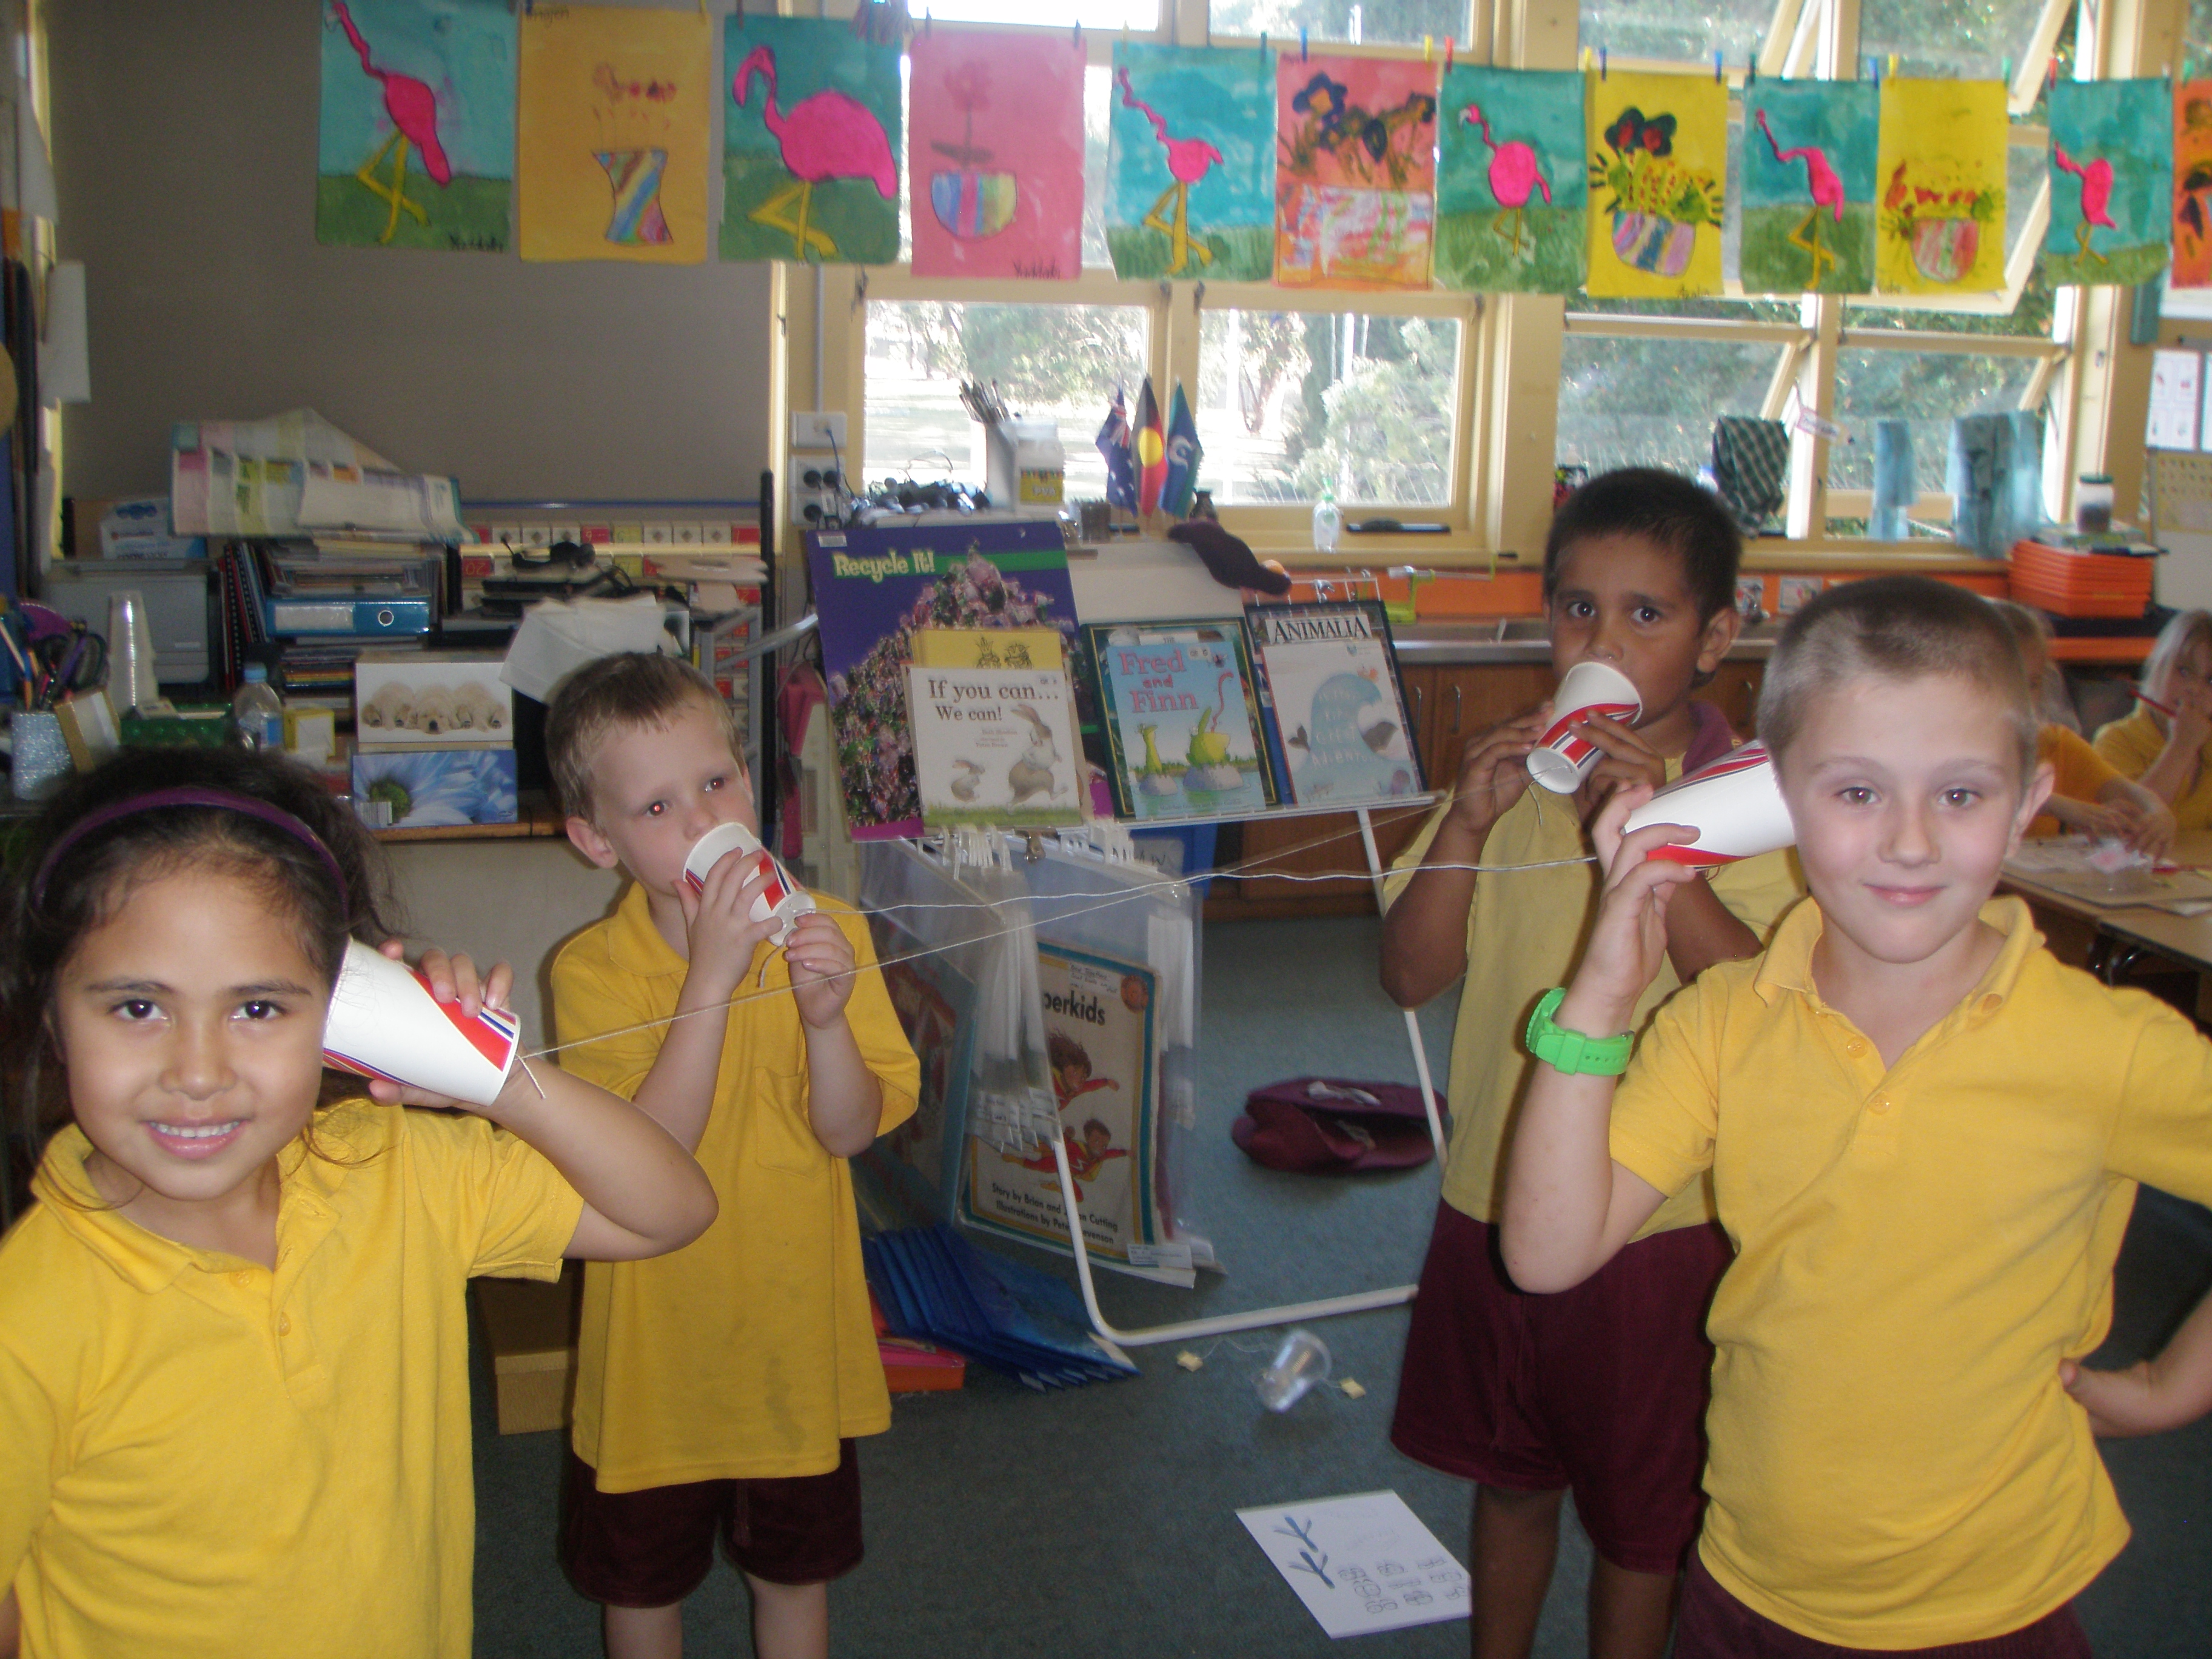 Experimenting with paper cup telephones